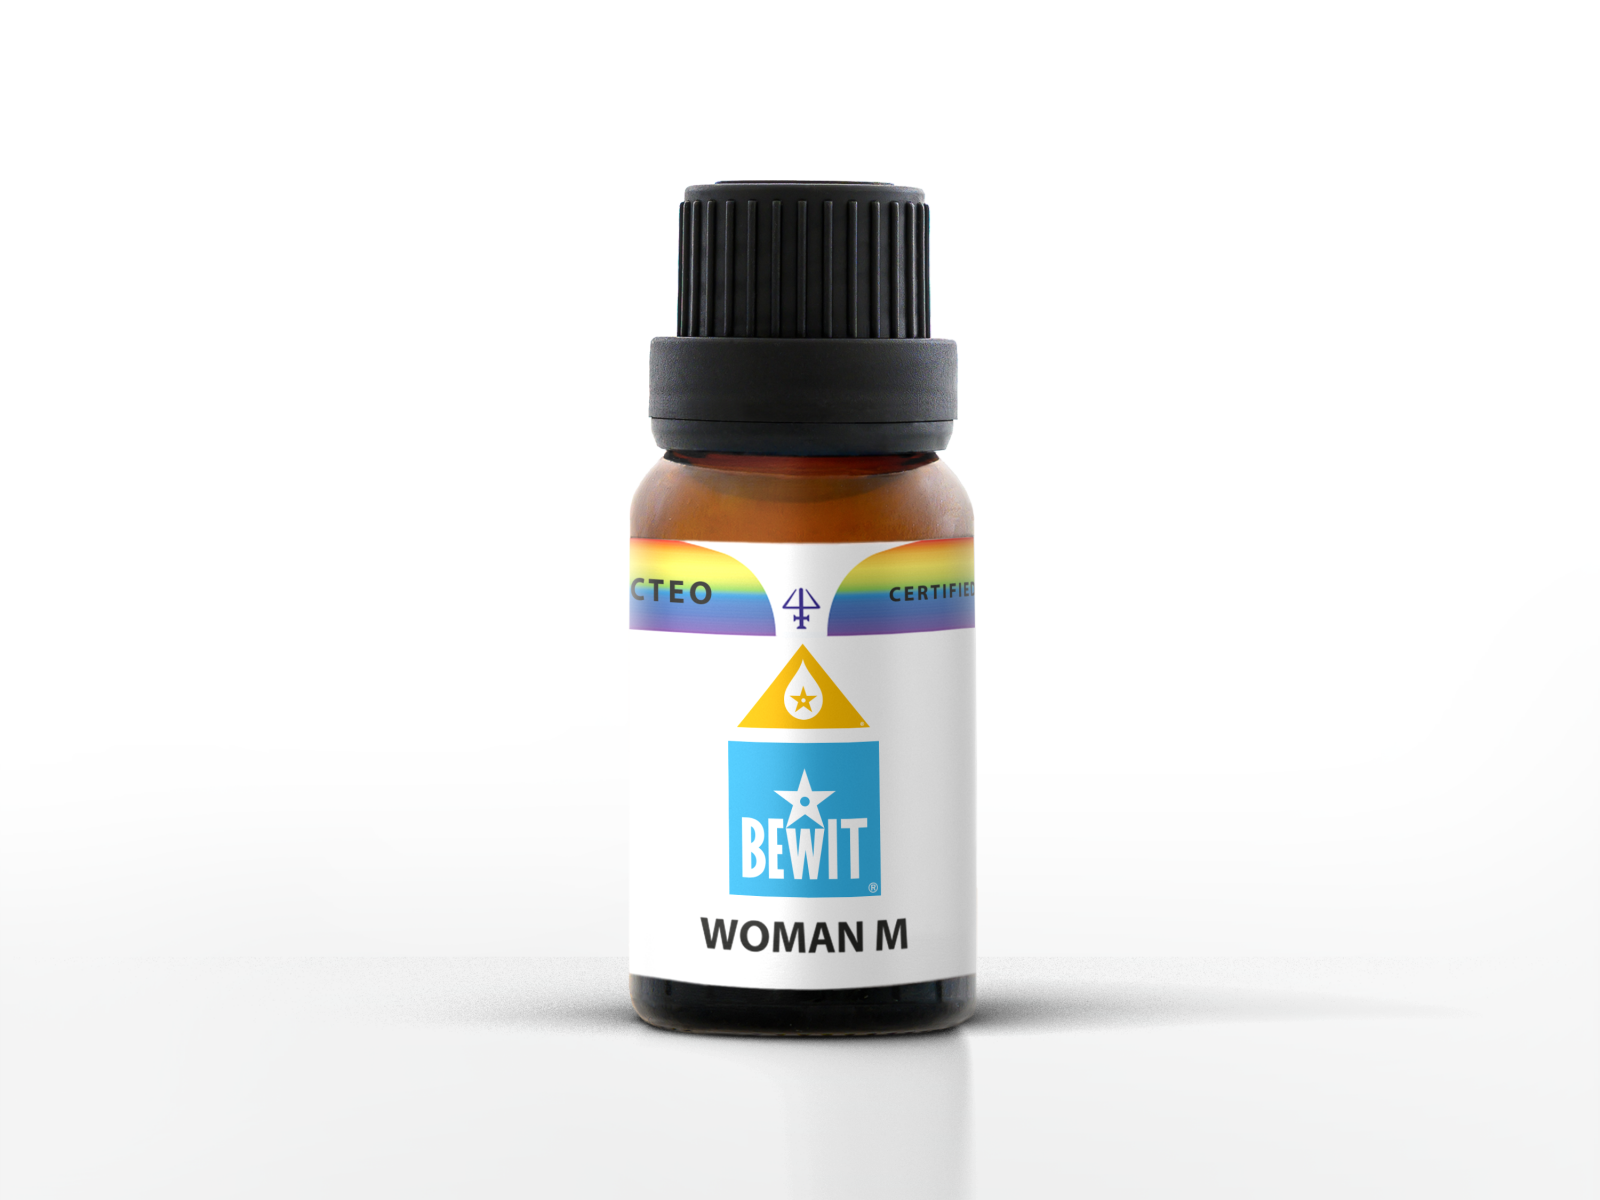 BEWIT WOMAN M - Blend of essential oils - 1